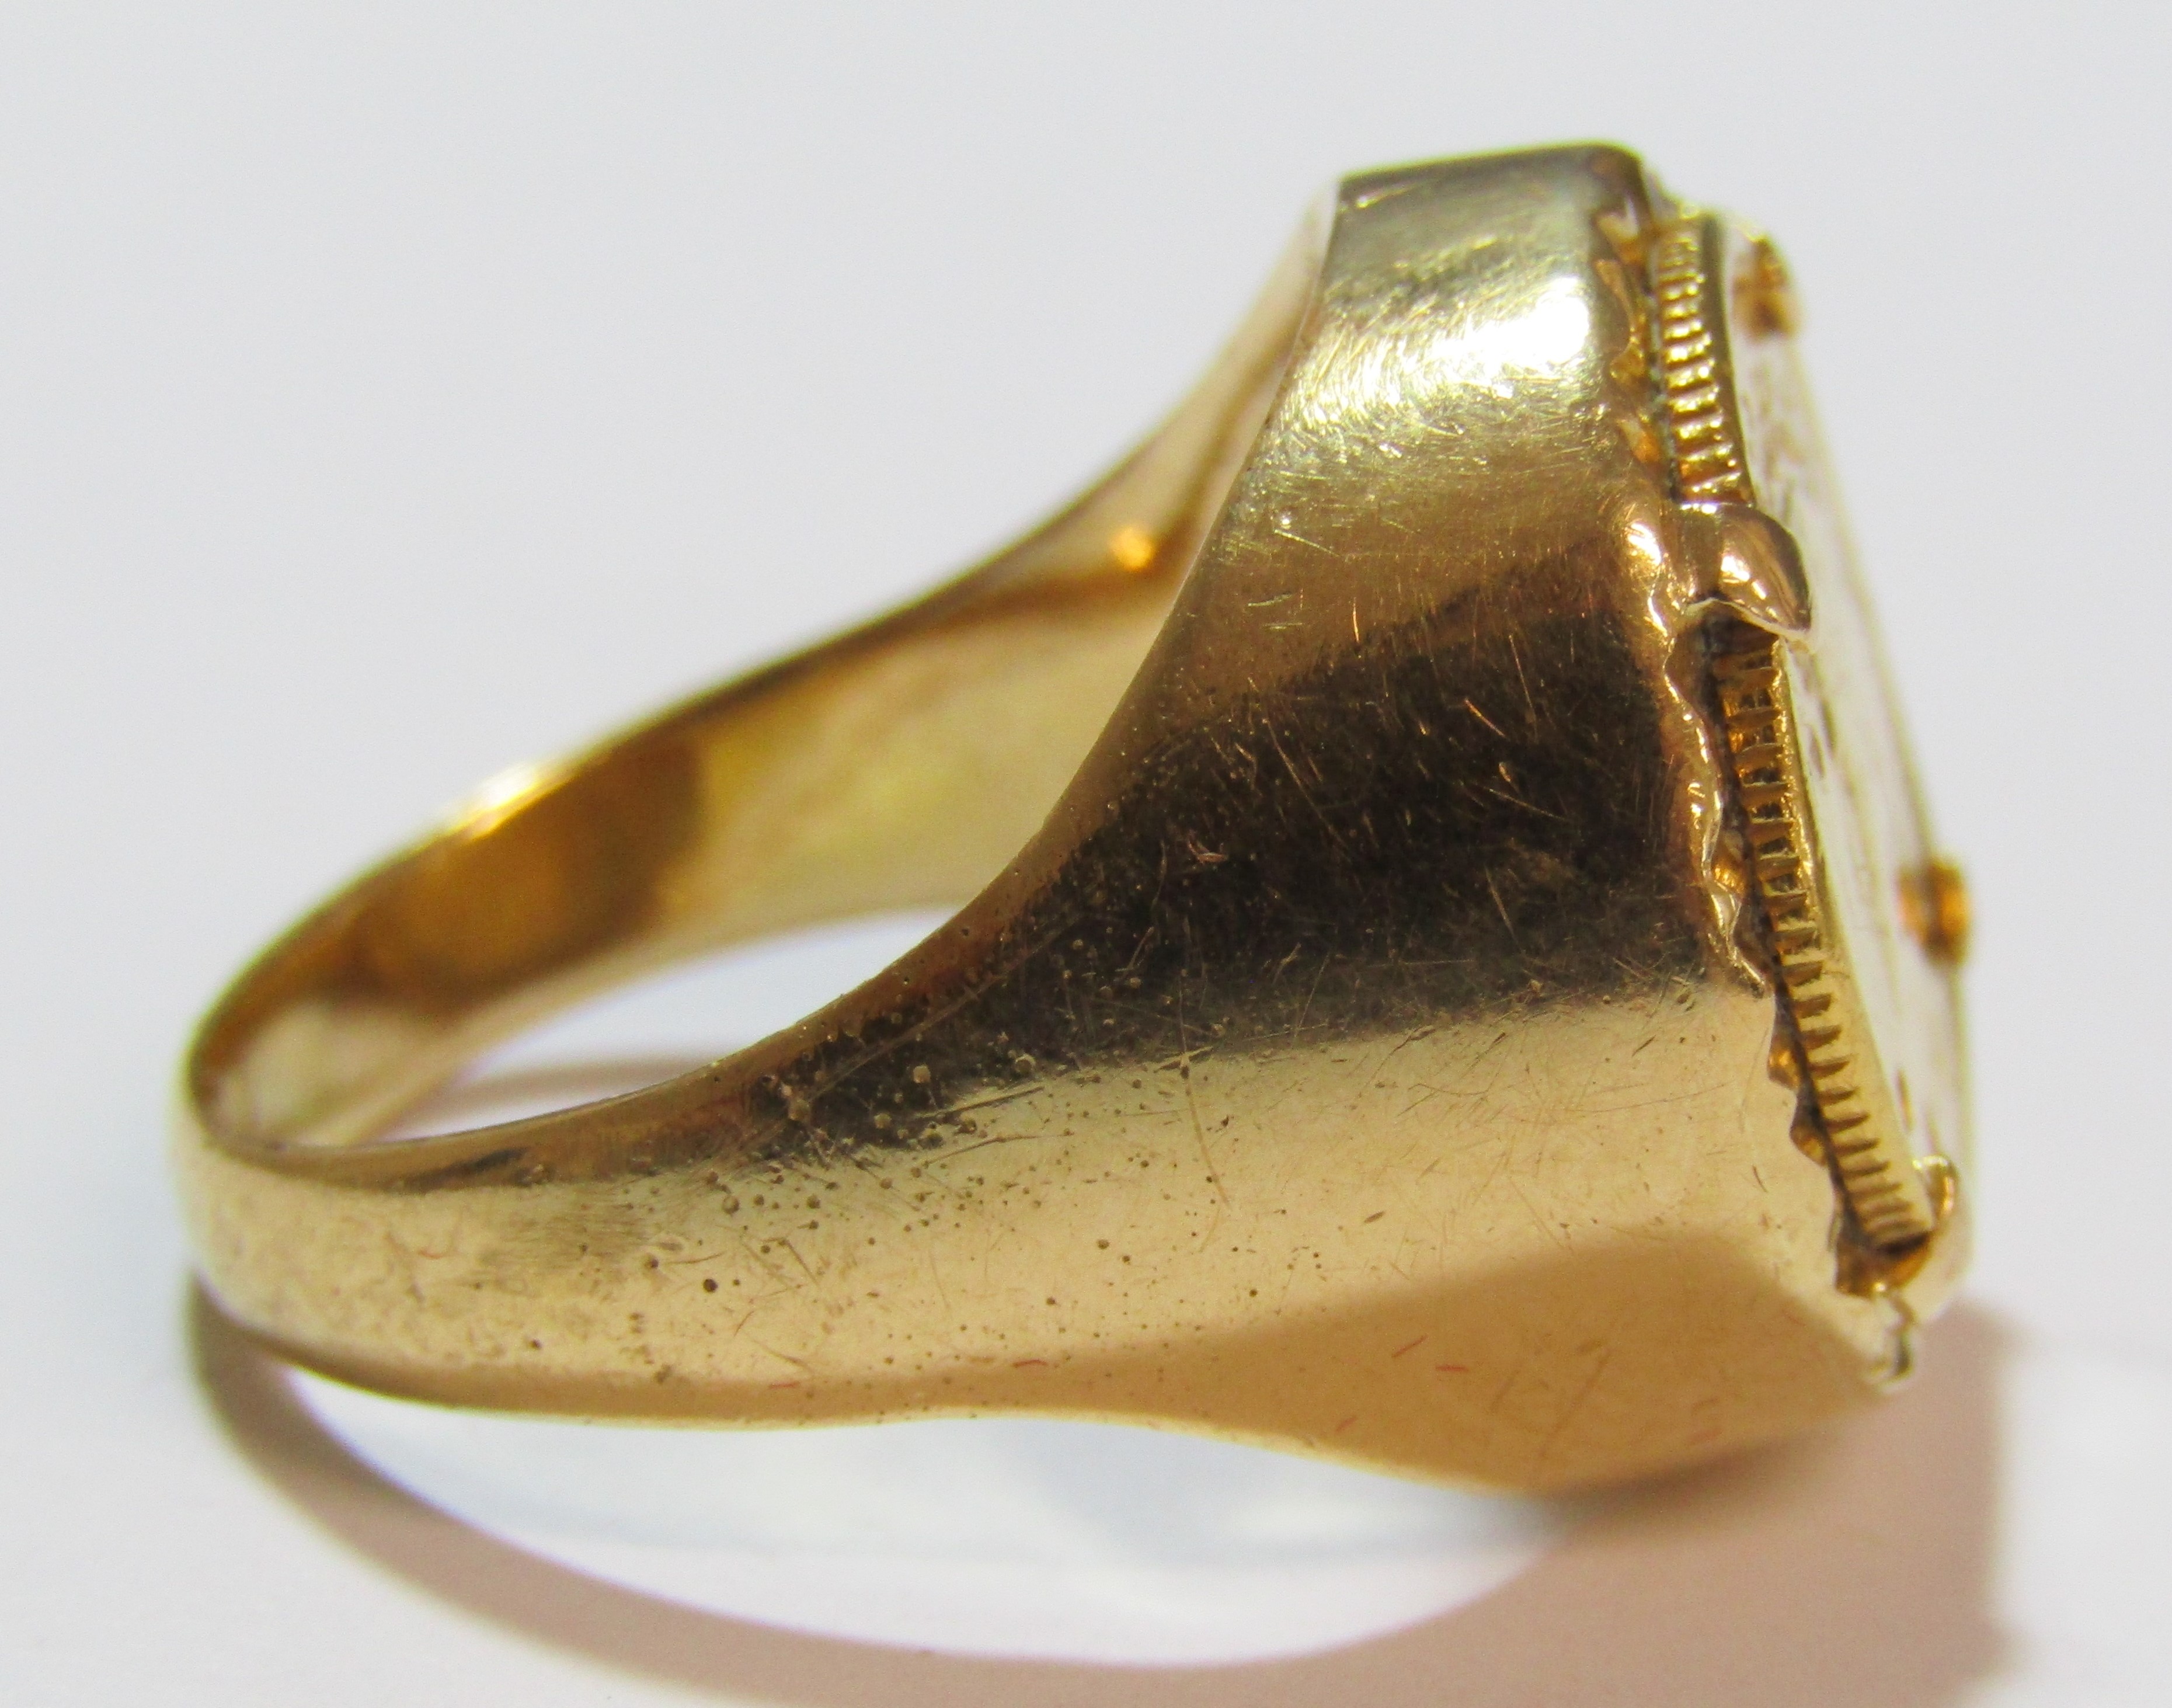 Tested as 9ct gold ring mounted with 22ct Phalavi Mohammad Reza Shah Iran gold quarter - ring size N - Image 4 of 6